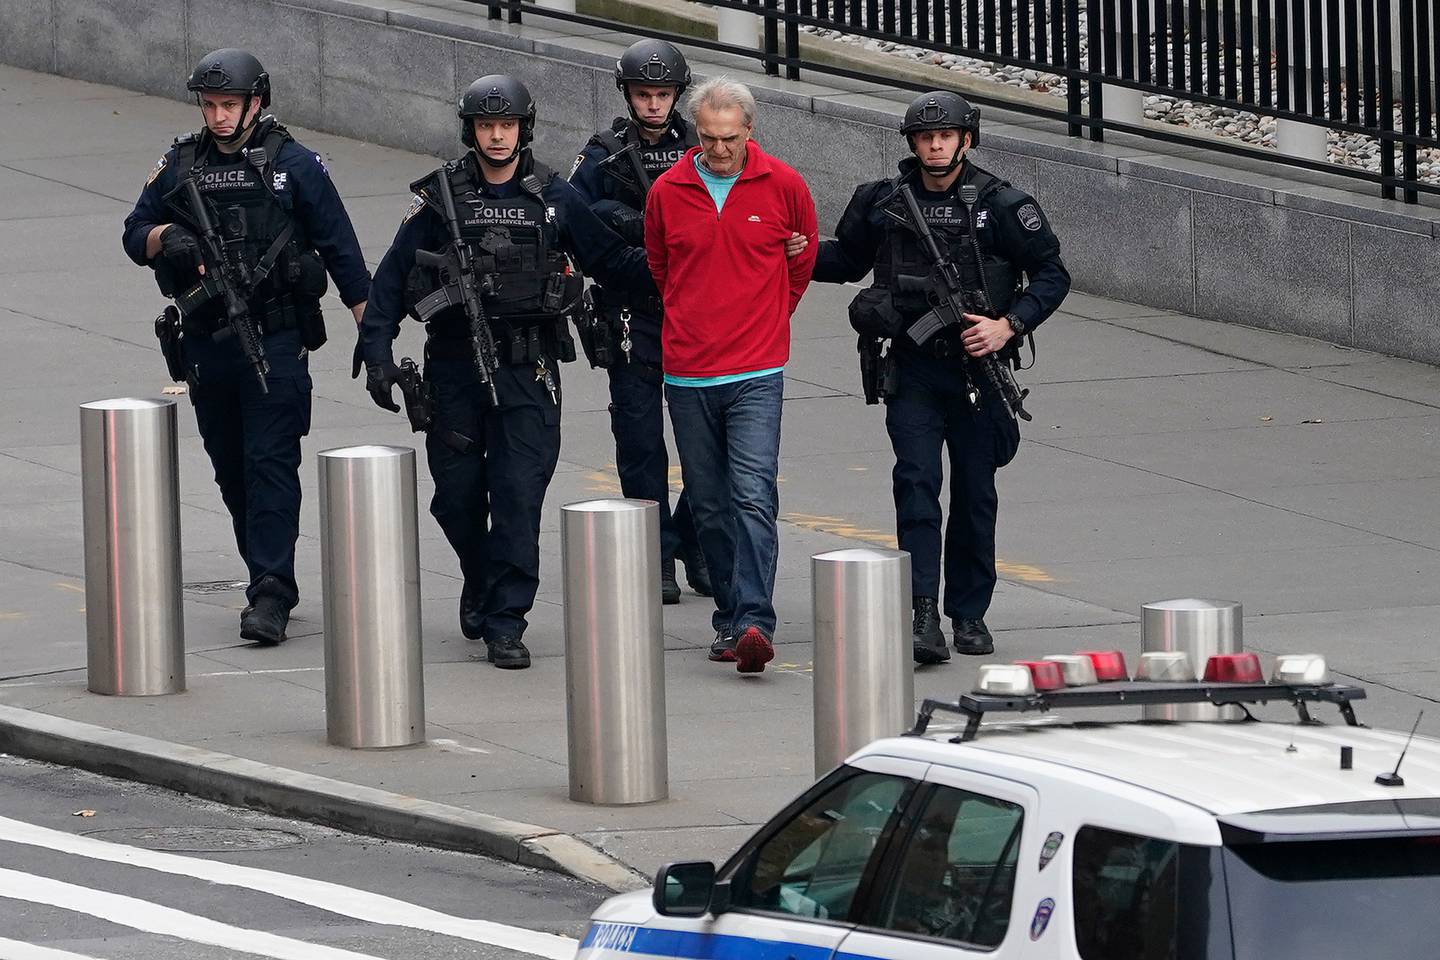 Armed man outside United Nations headquarters arrested after standoff